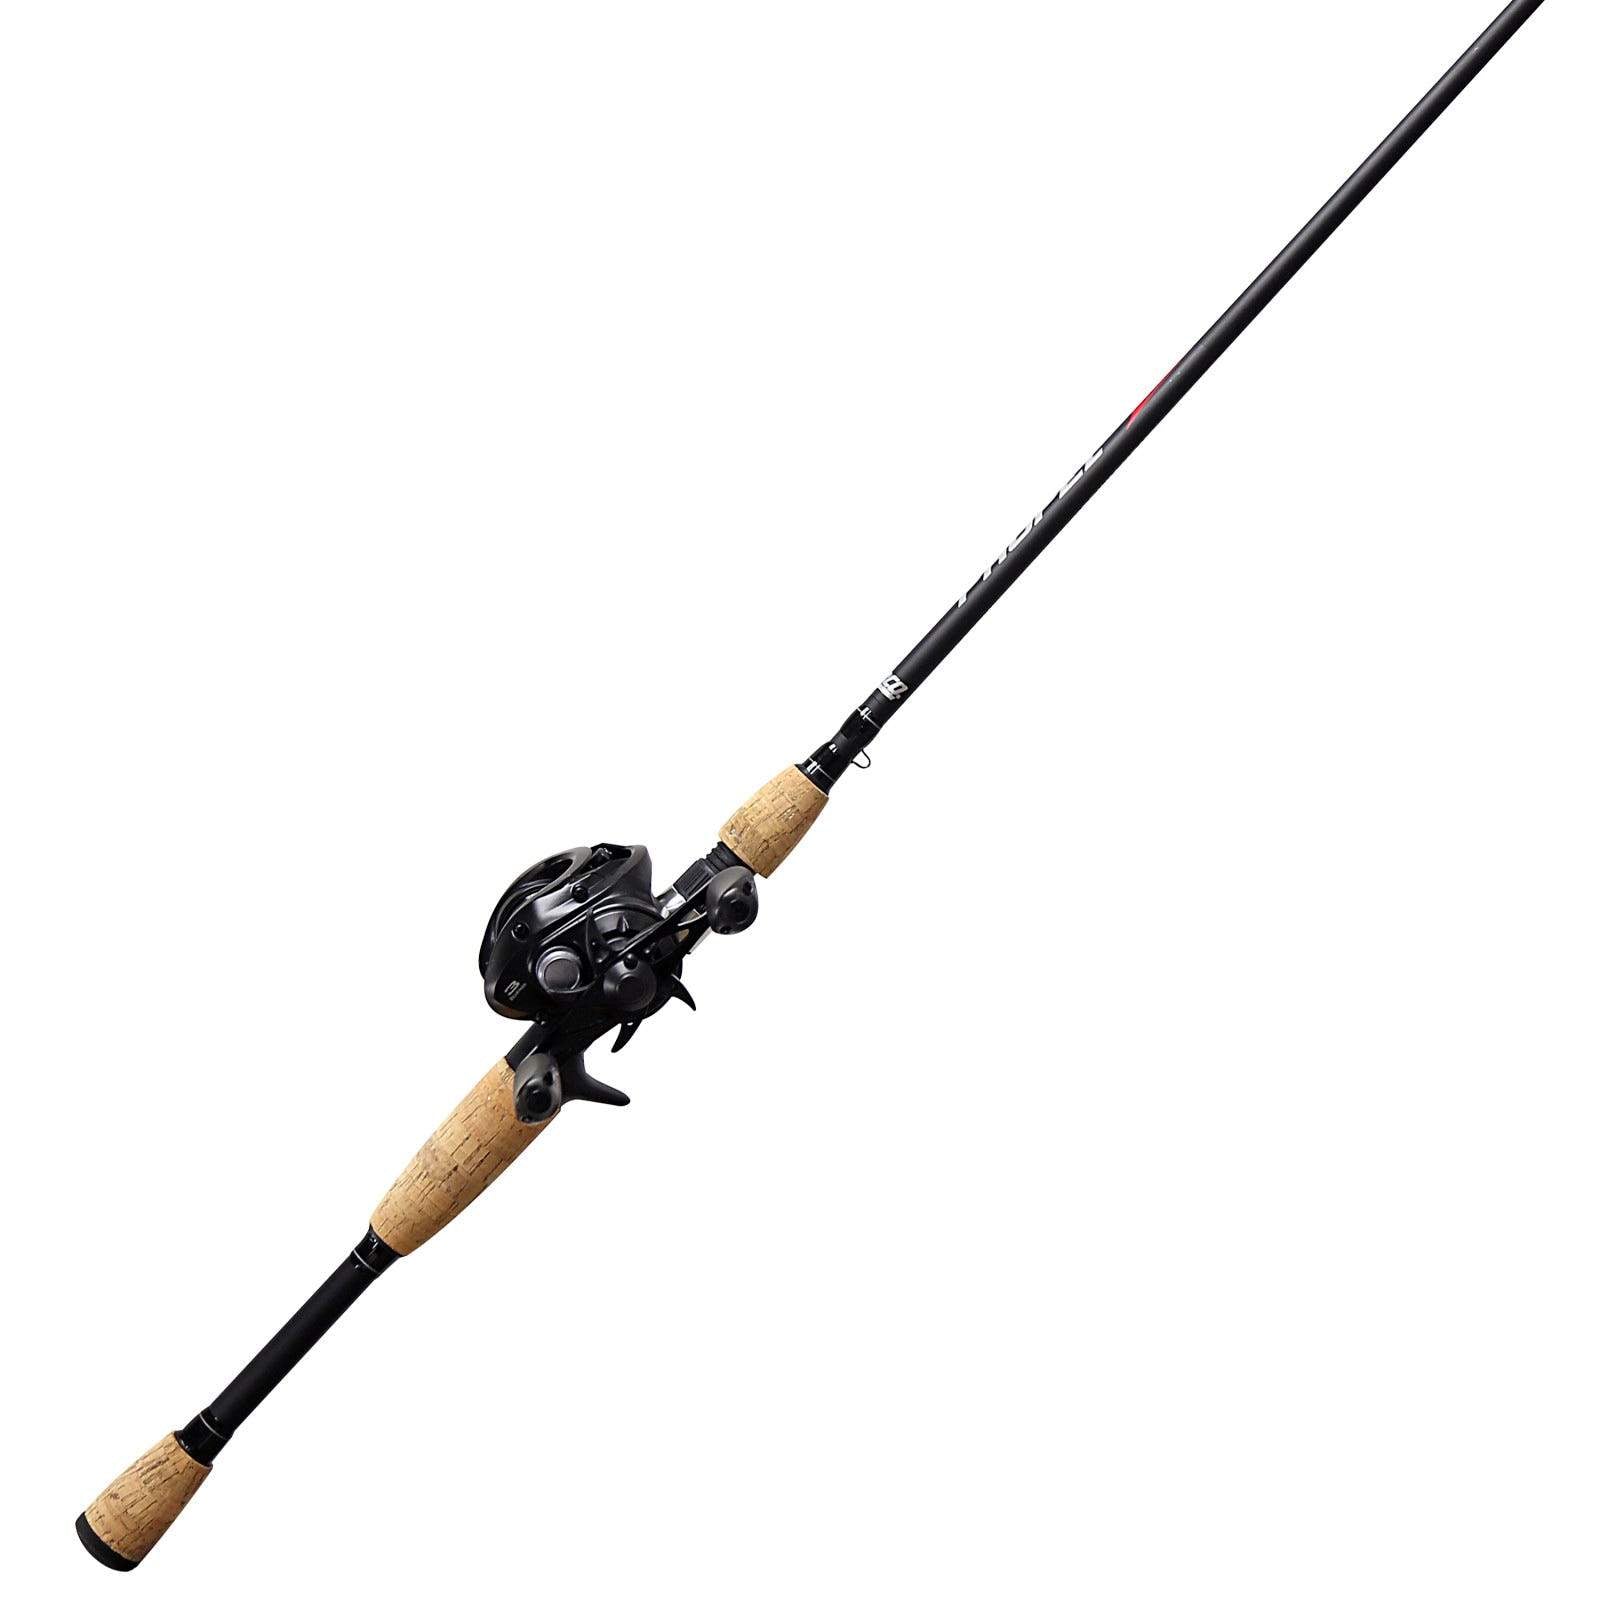 Zebco All Freshwater Spinning Fishing Reel Reels